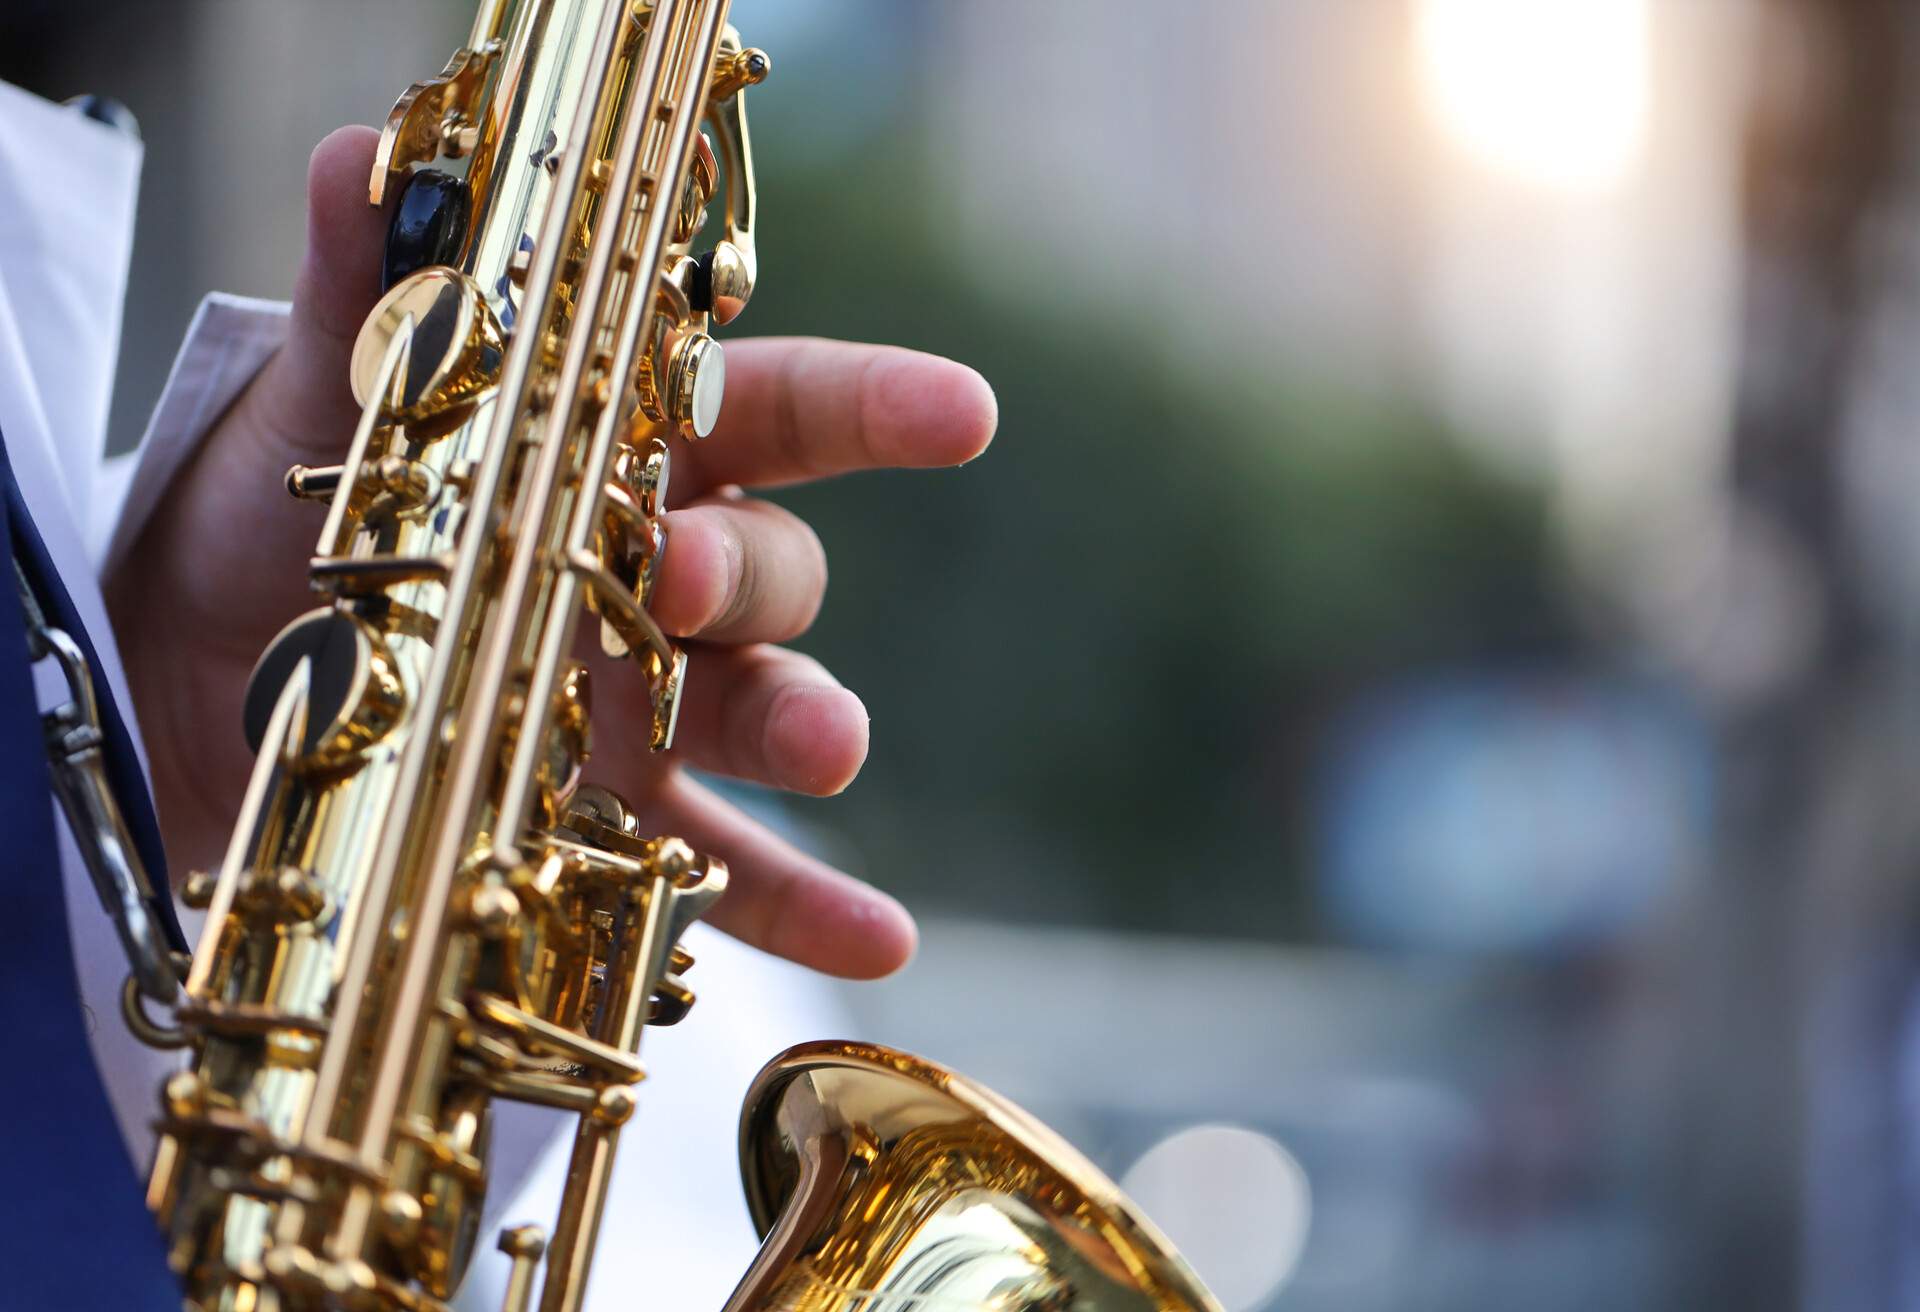 Saxophone,International jazz day and World Jazz festival. Saxophone, music instrument played by saxophonist player musician in fest.